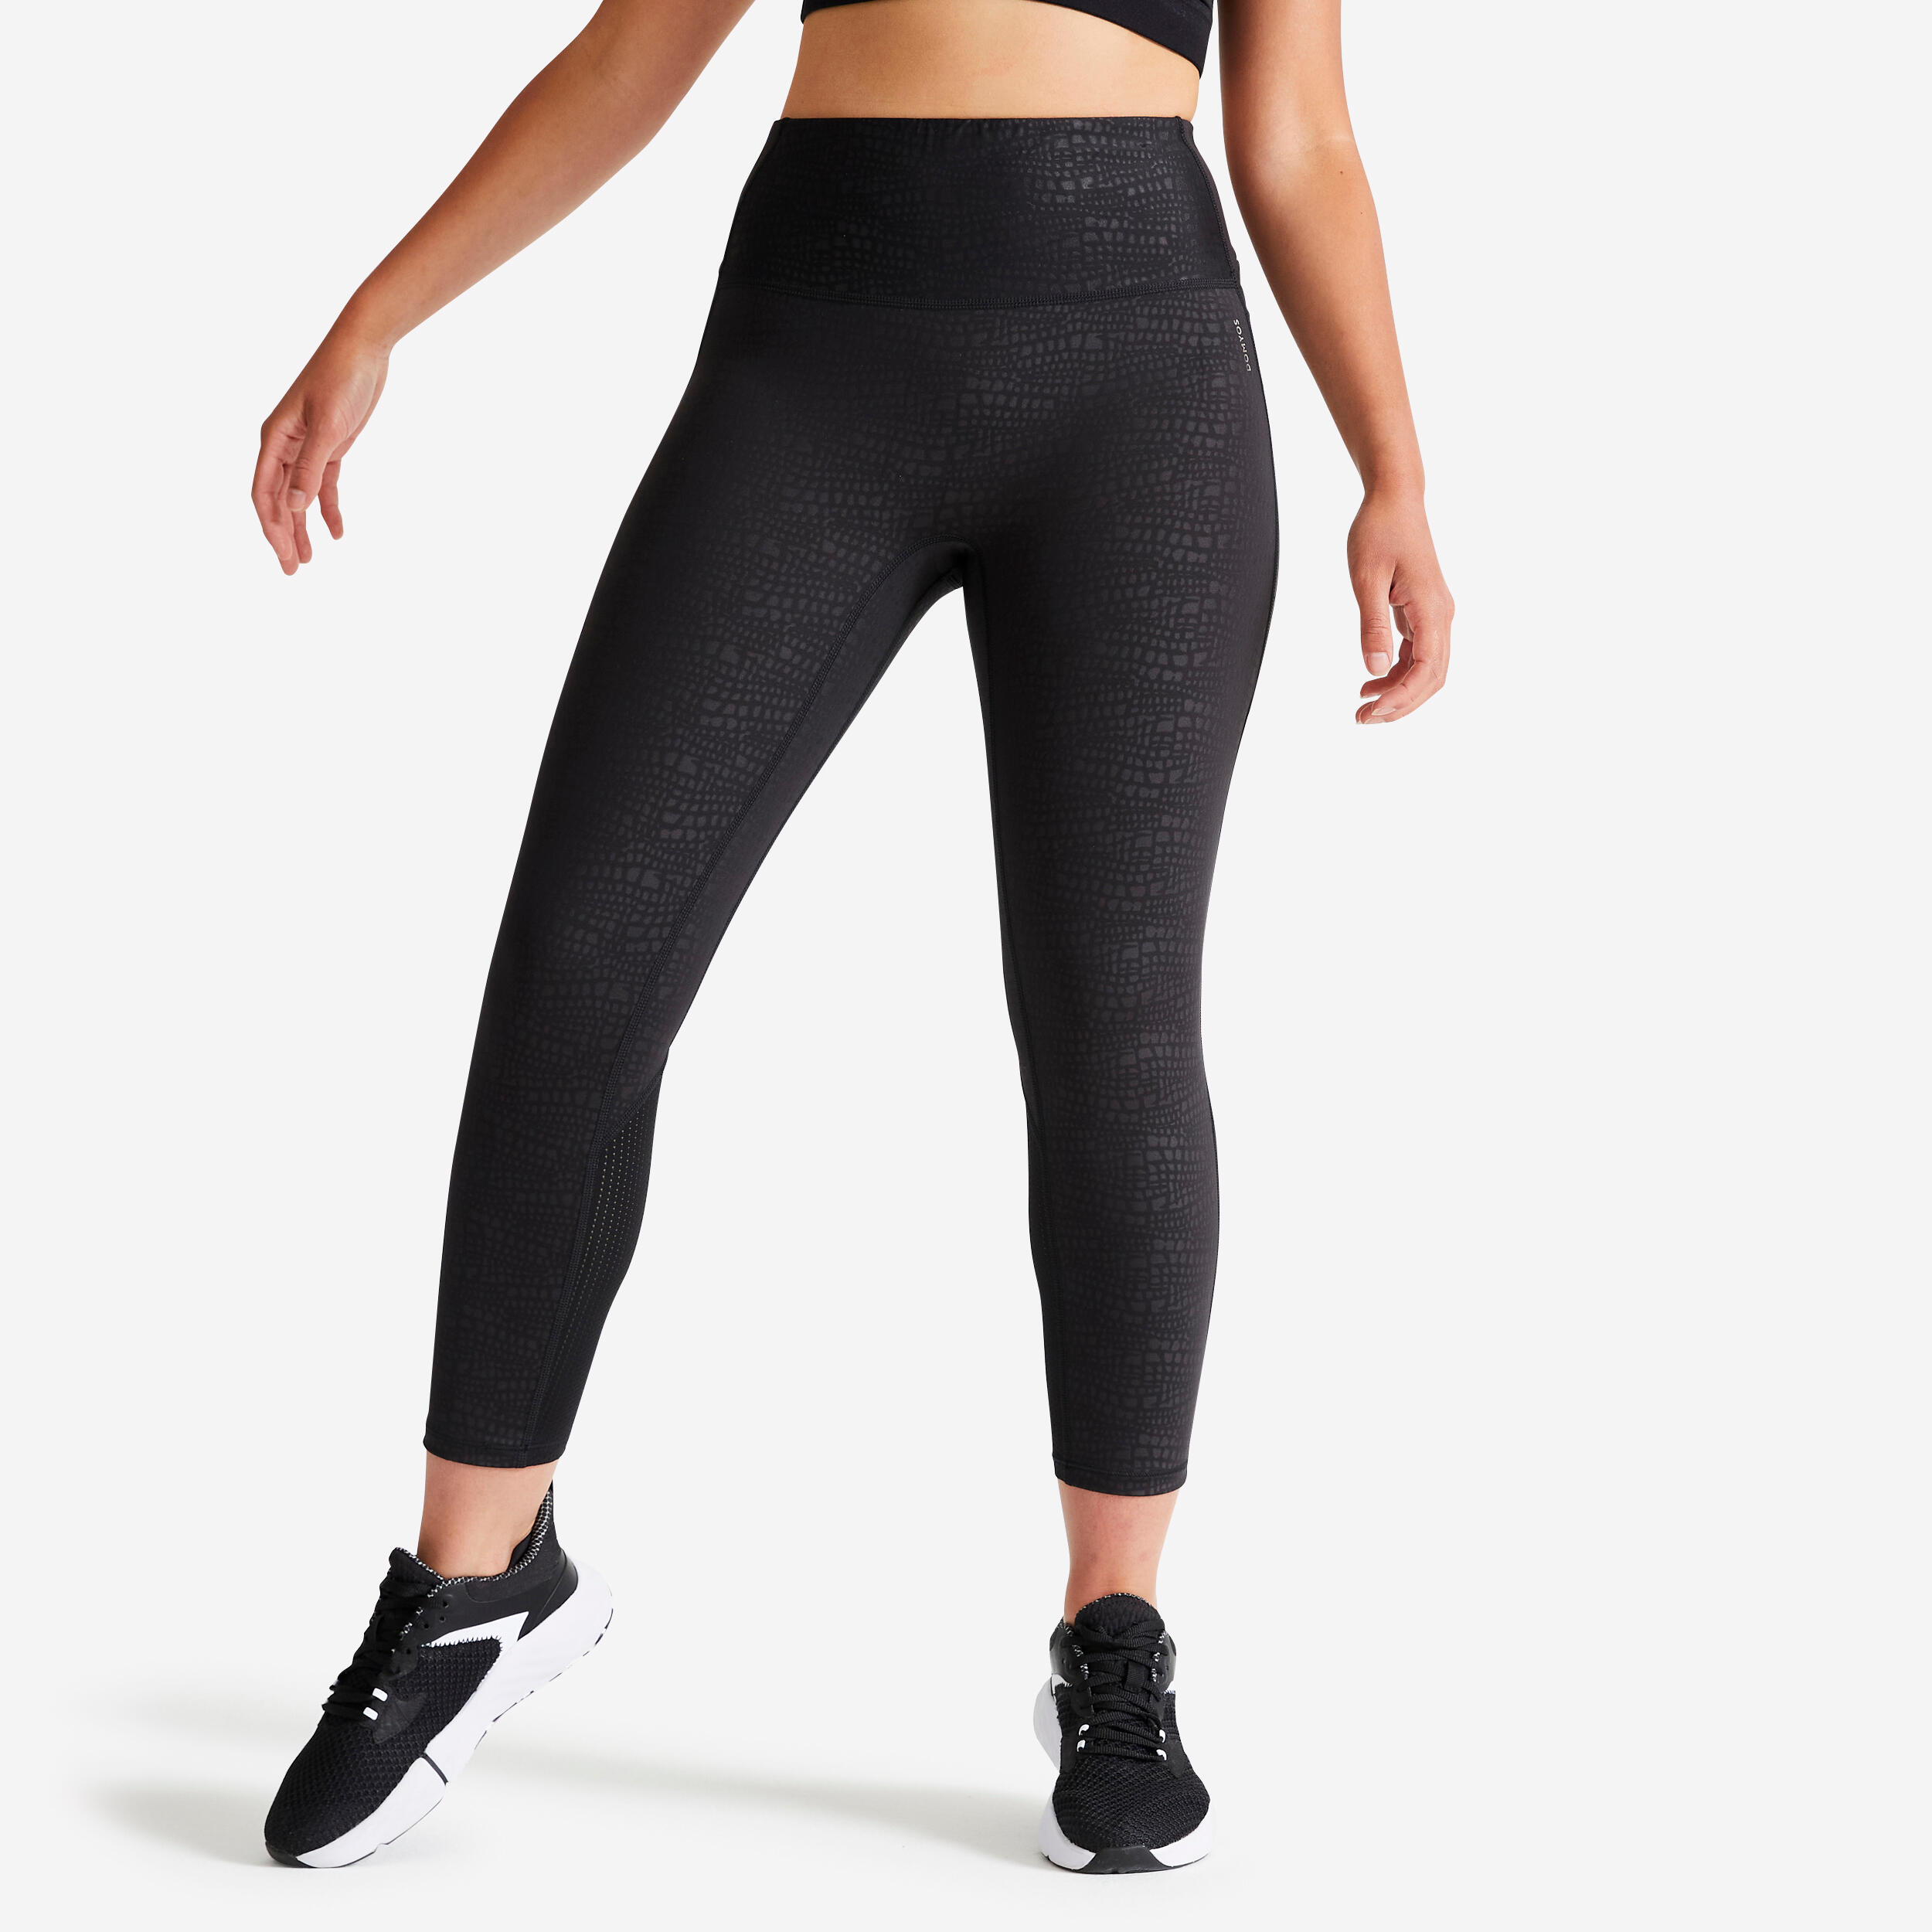 IKI CHIC coordsetwomenwesternwear  Buy IKI CHIC 3 Pc Gym Wear Set With High  Waist Leggings And Top With Sports Bra Online  Nykaa Fashion